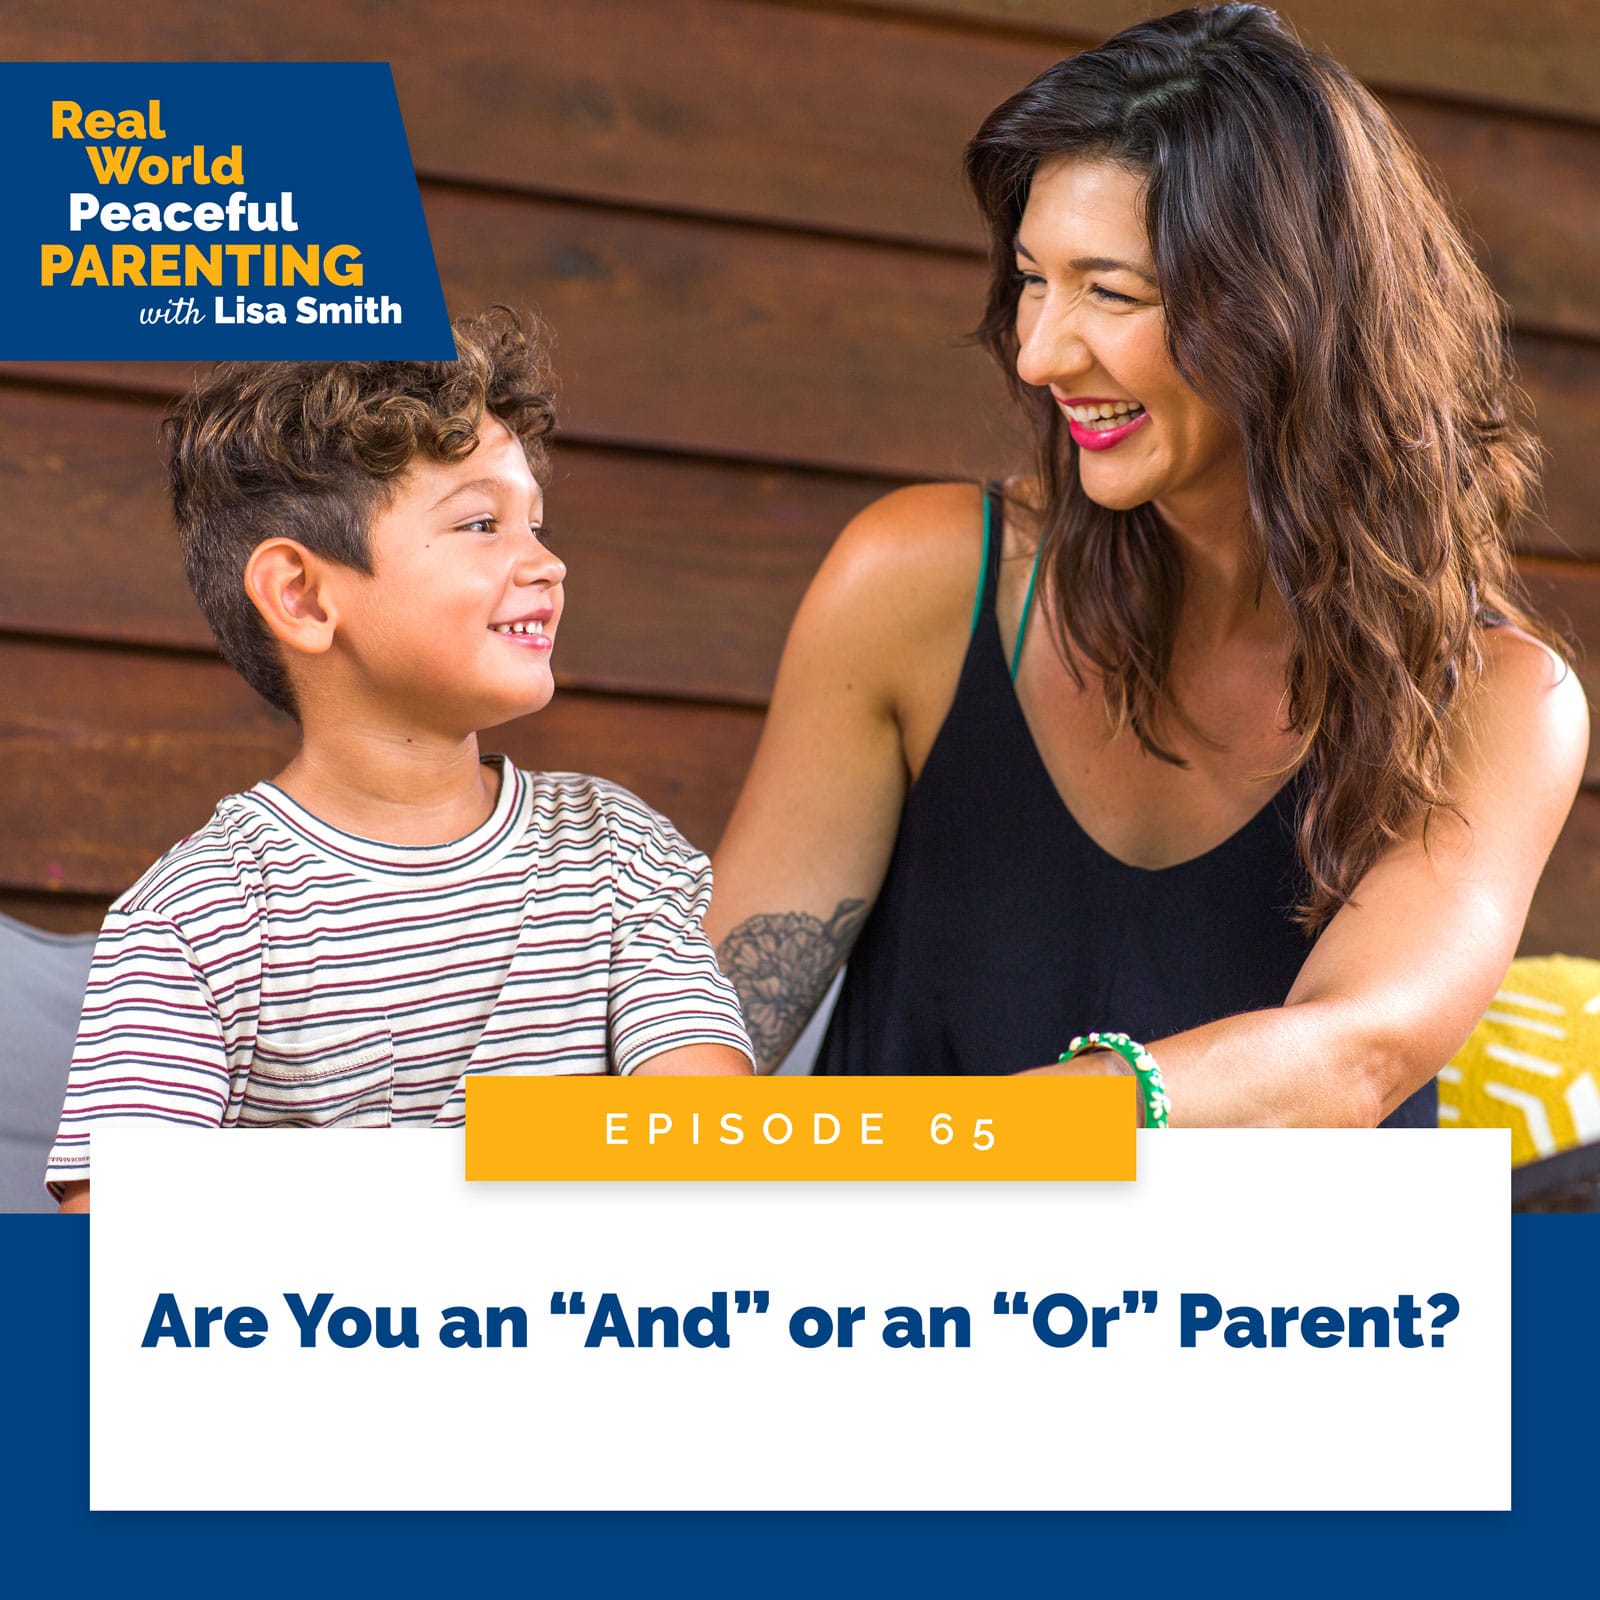 Real World Peaceful Parenting with Lisa Smith | Are You an “And” or an “Or” Parent?